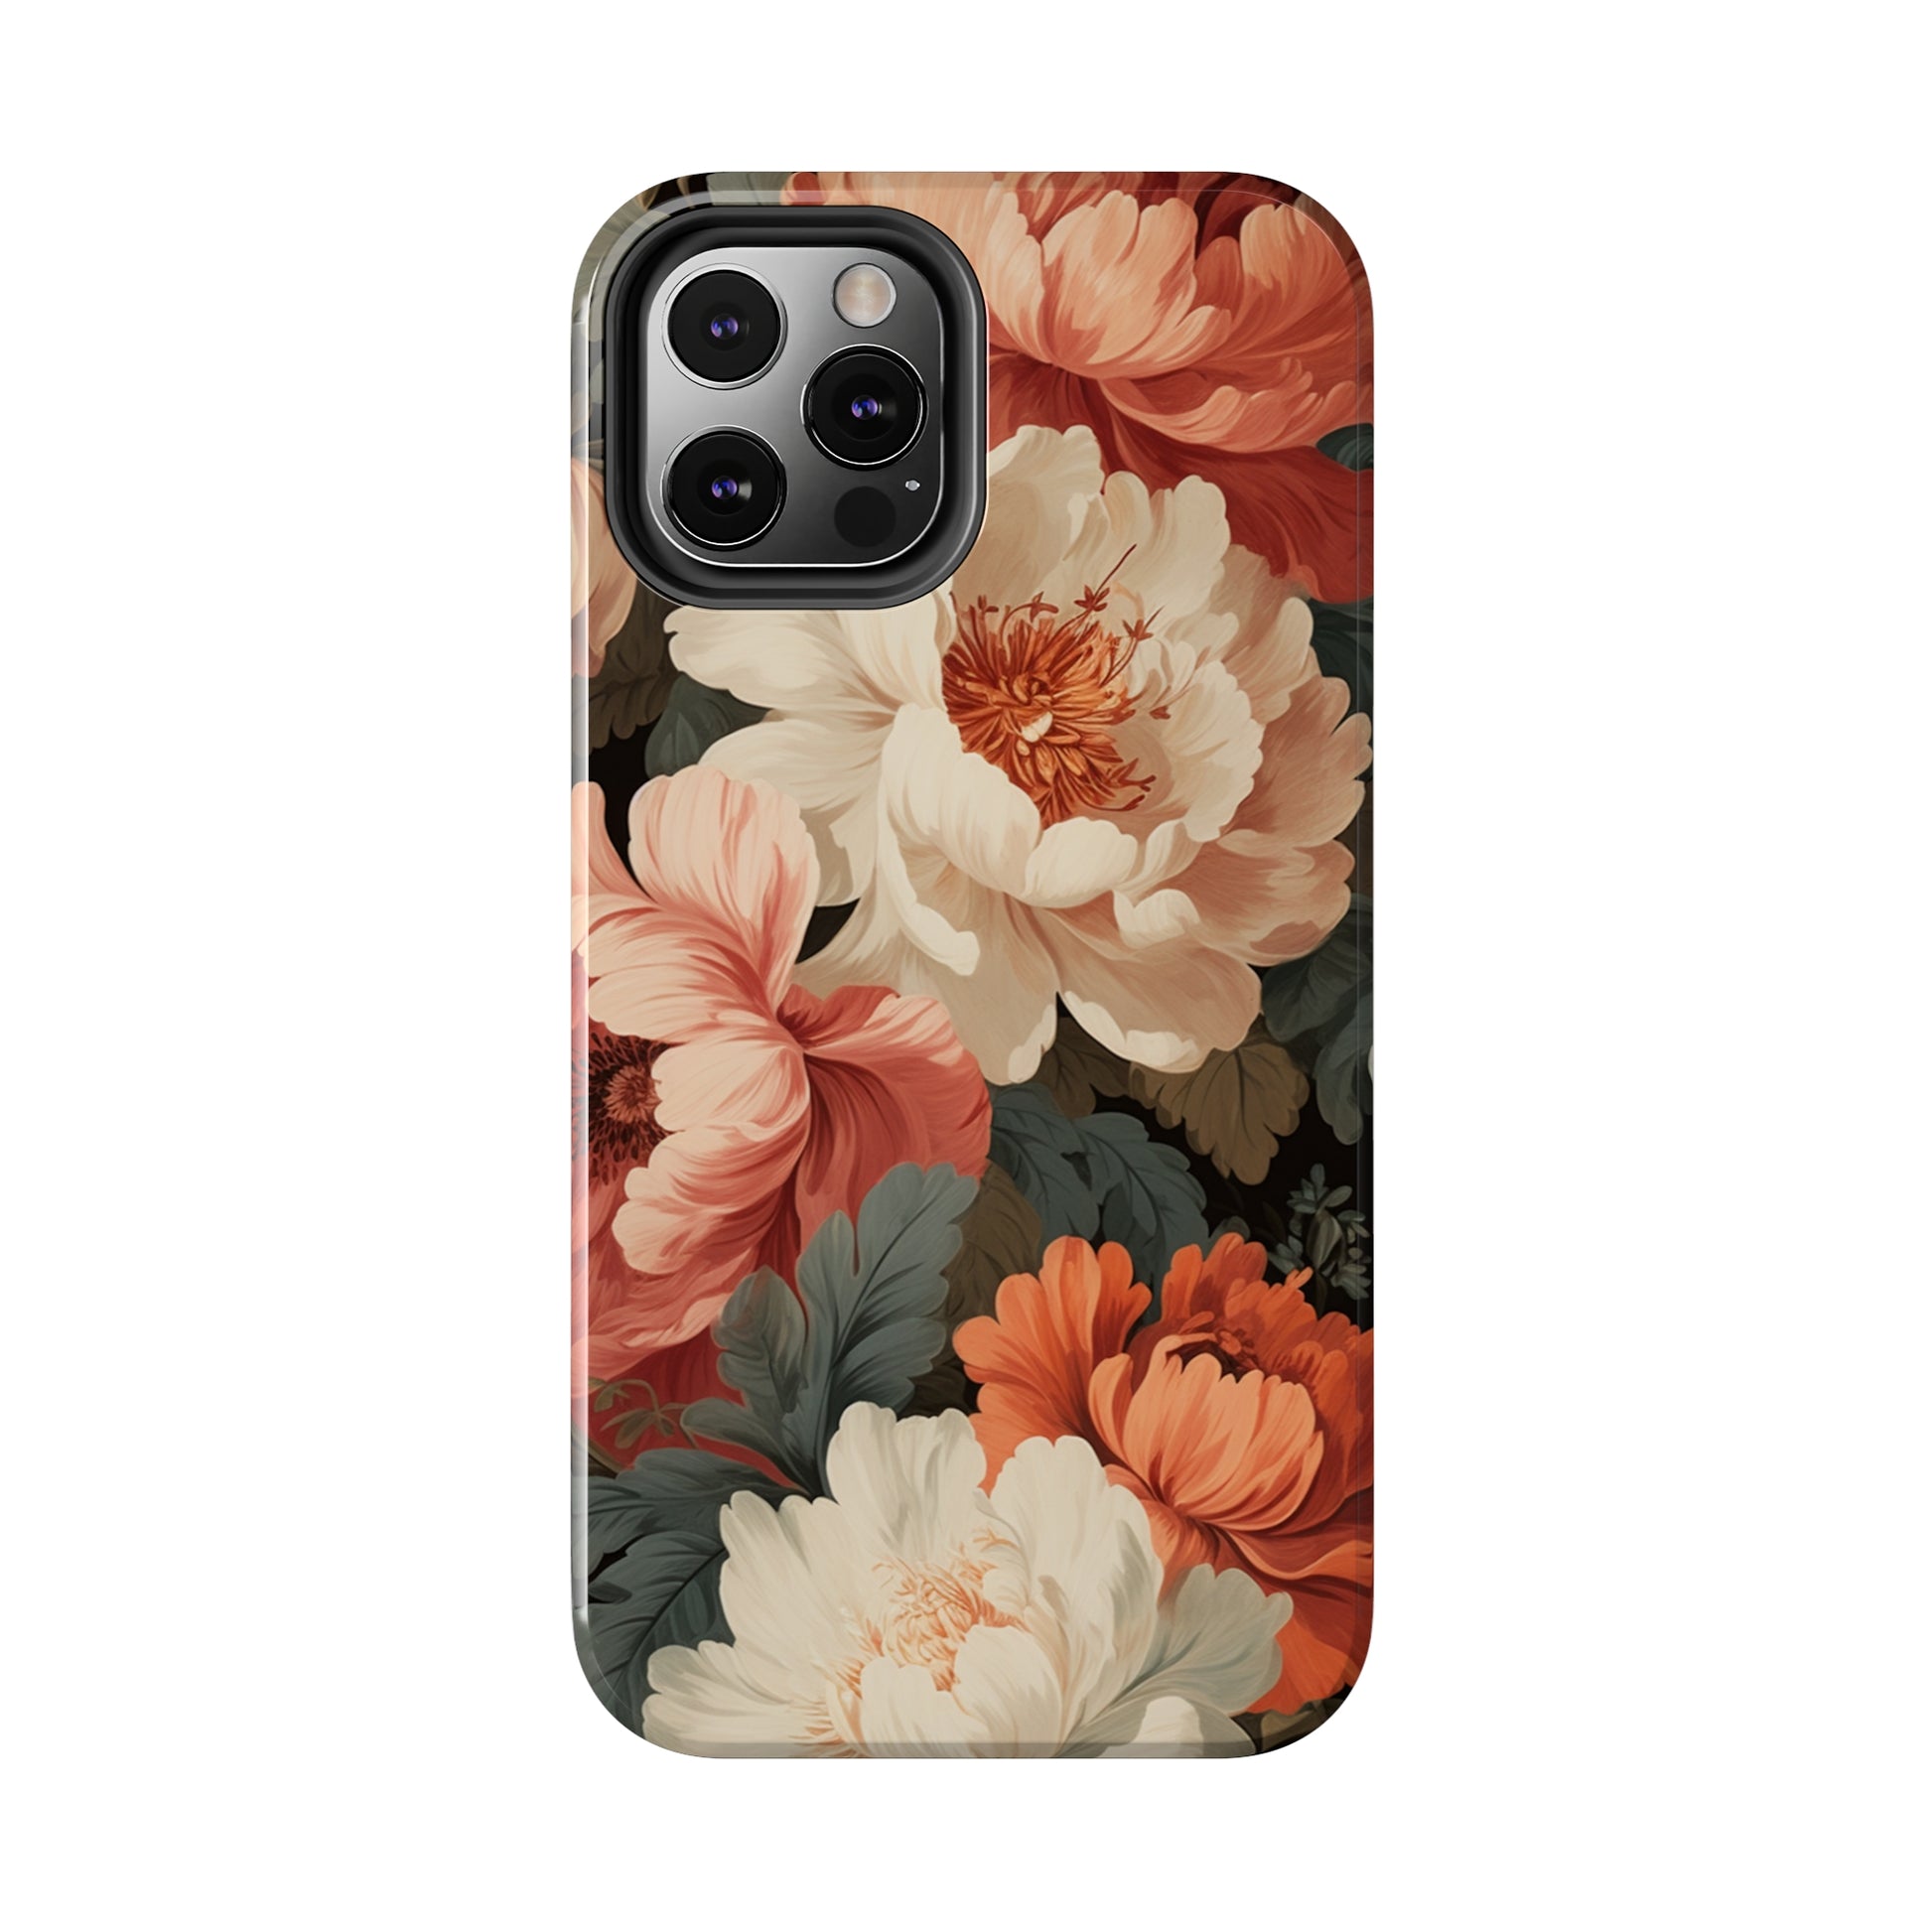 Vintage Floral Aesthetic iPhone 11 Case